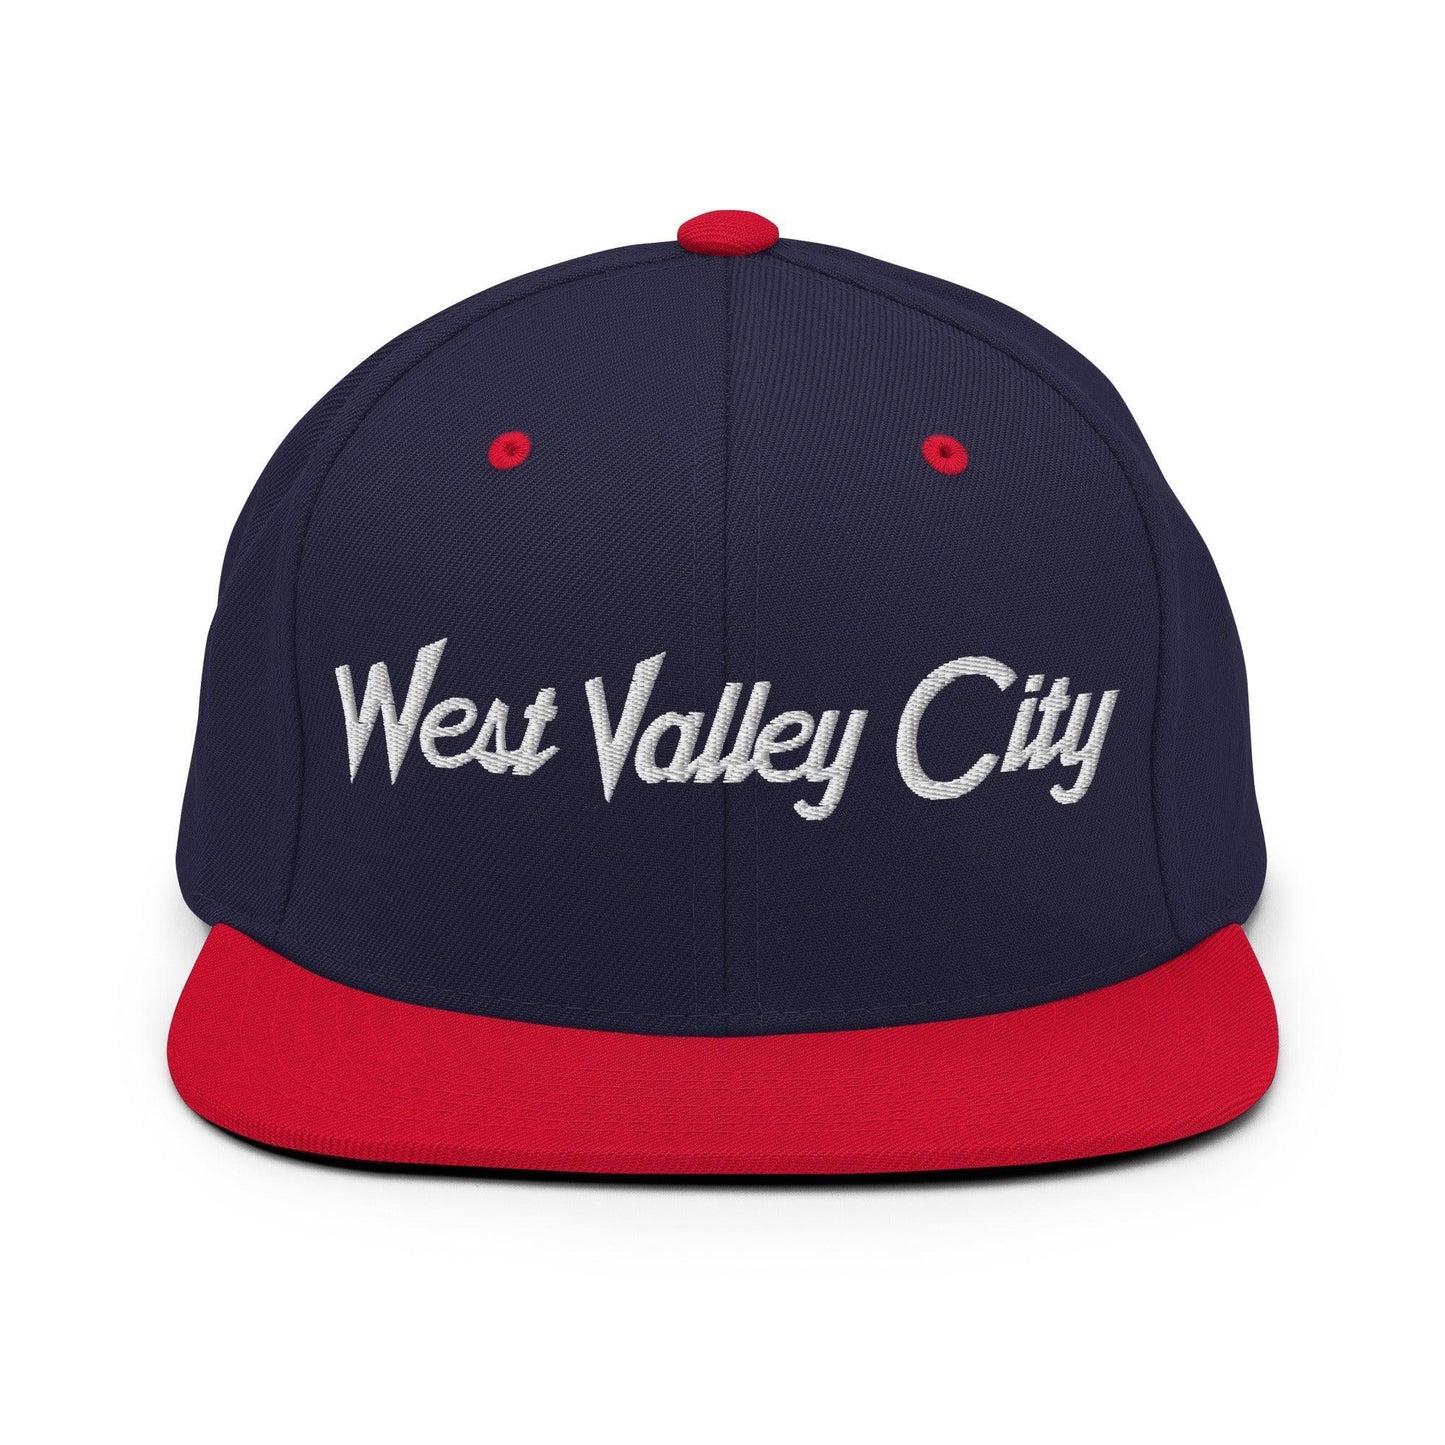 West Valley City Script Snapback Hat Navy Red